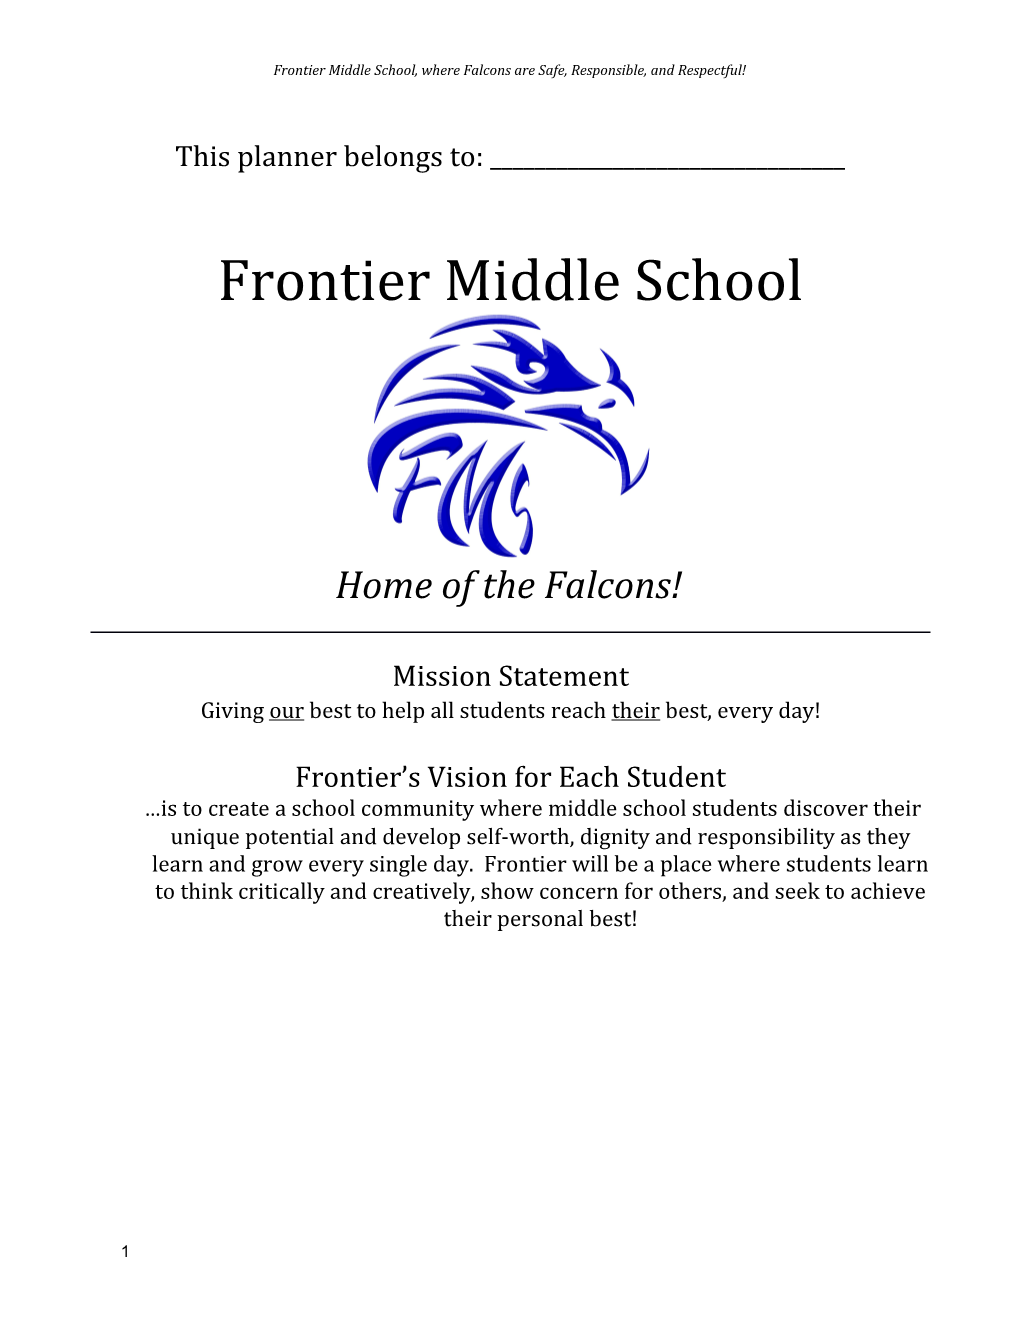 Frontier Middle School, Where Falcons Are Safe, Responsible, and Respectful!